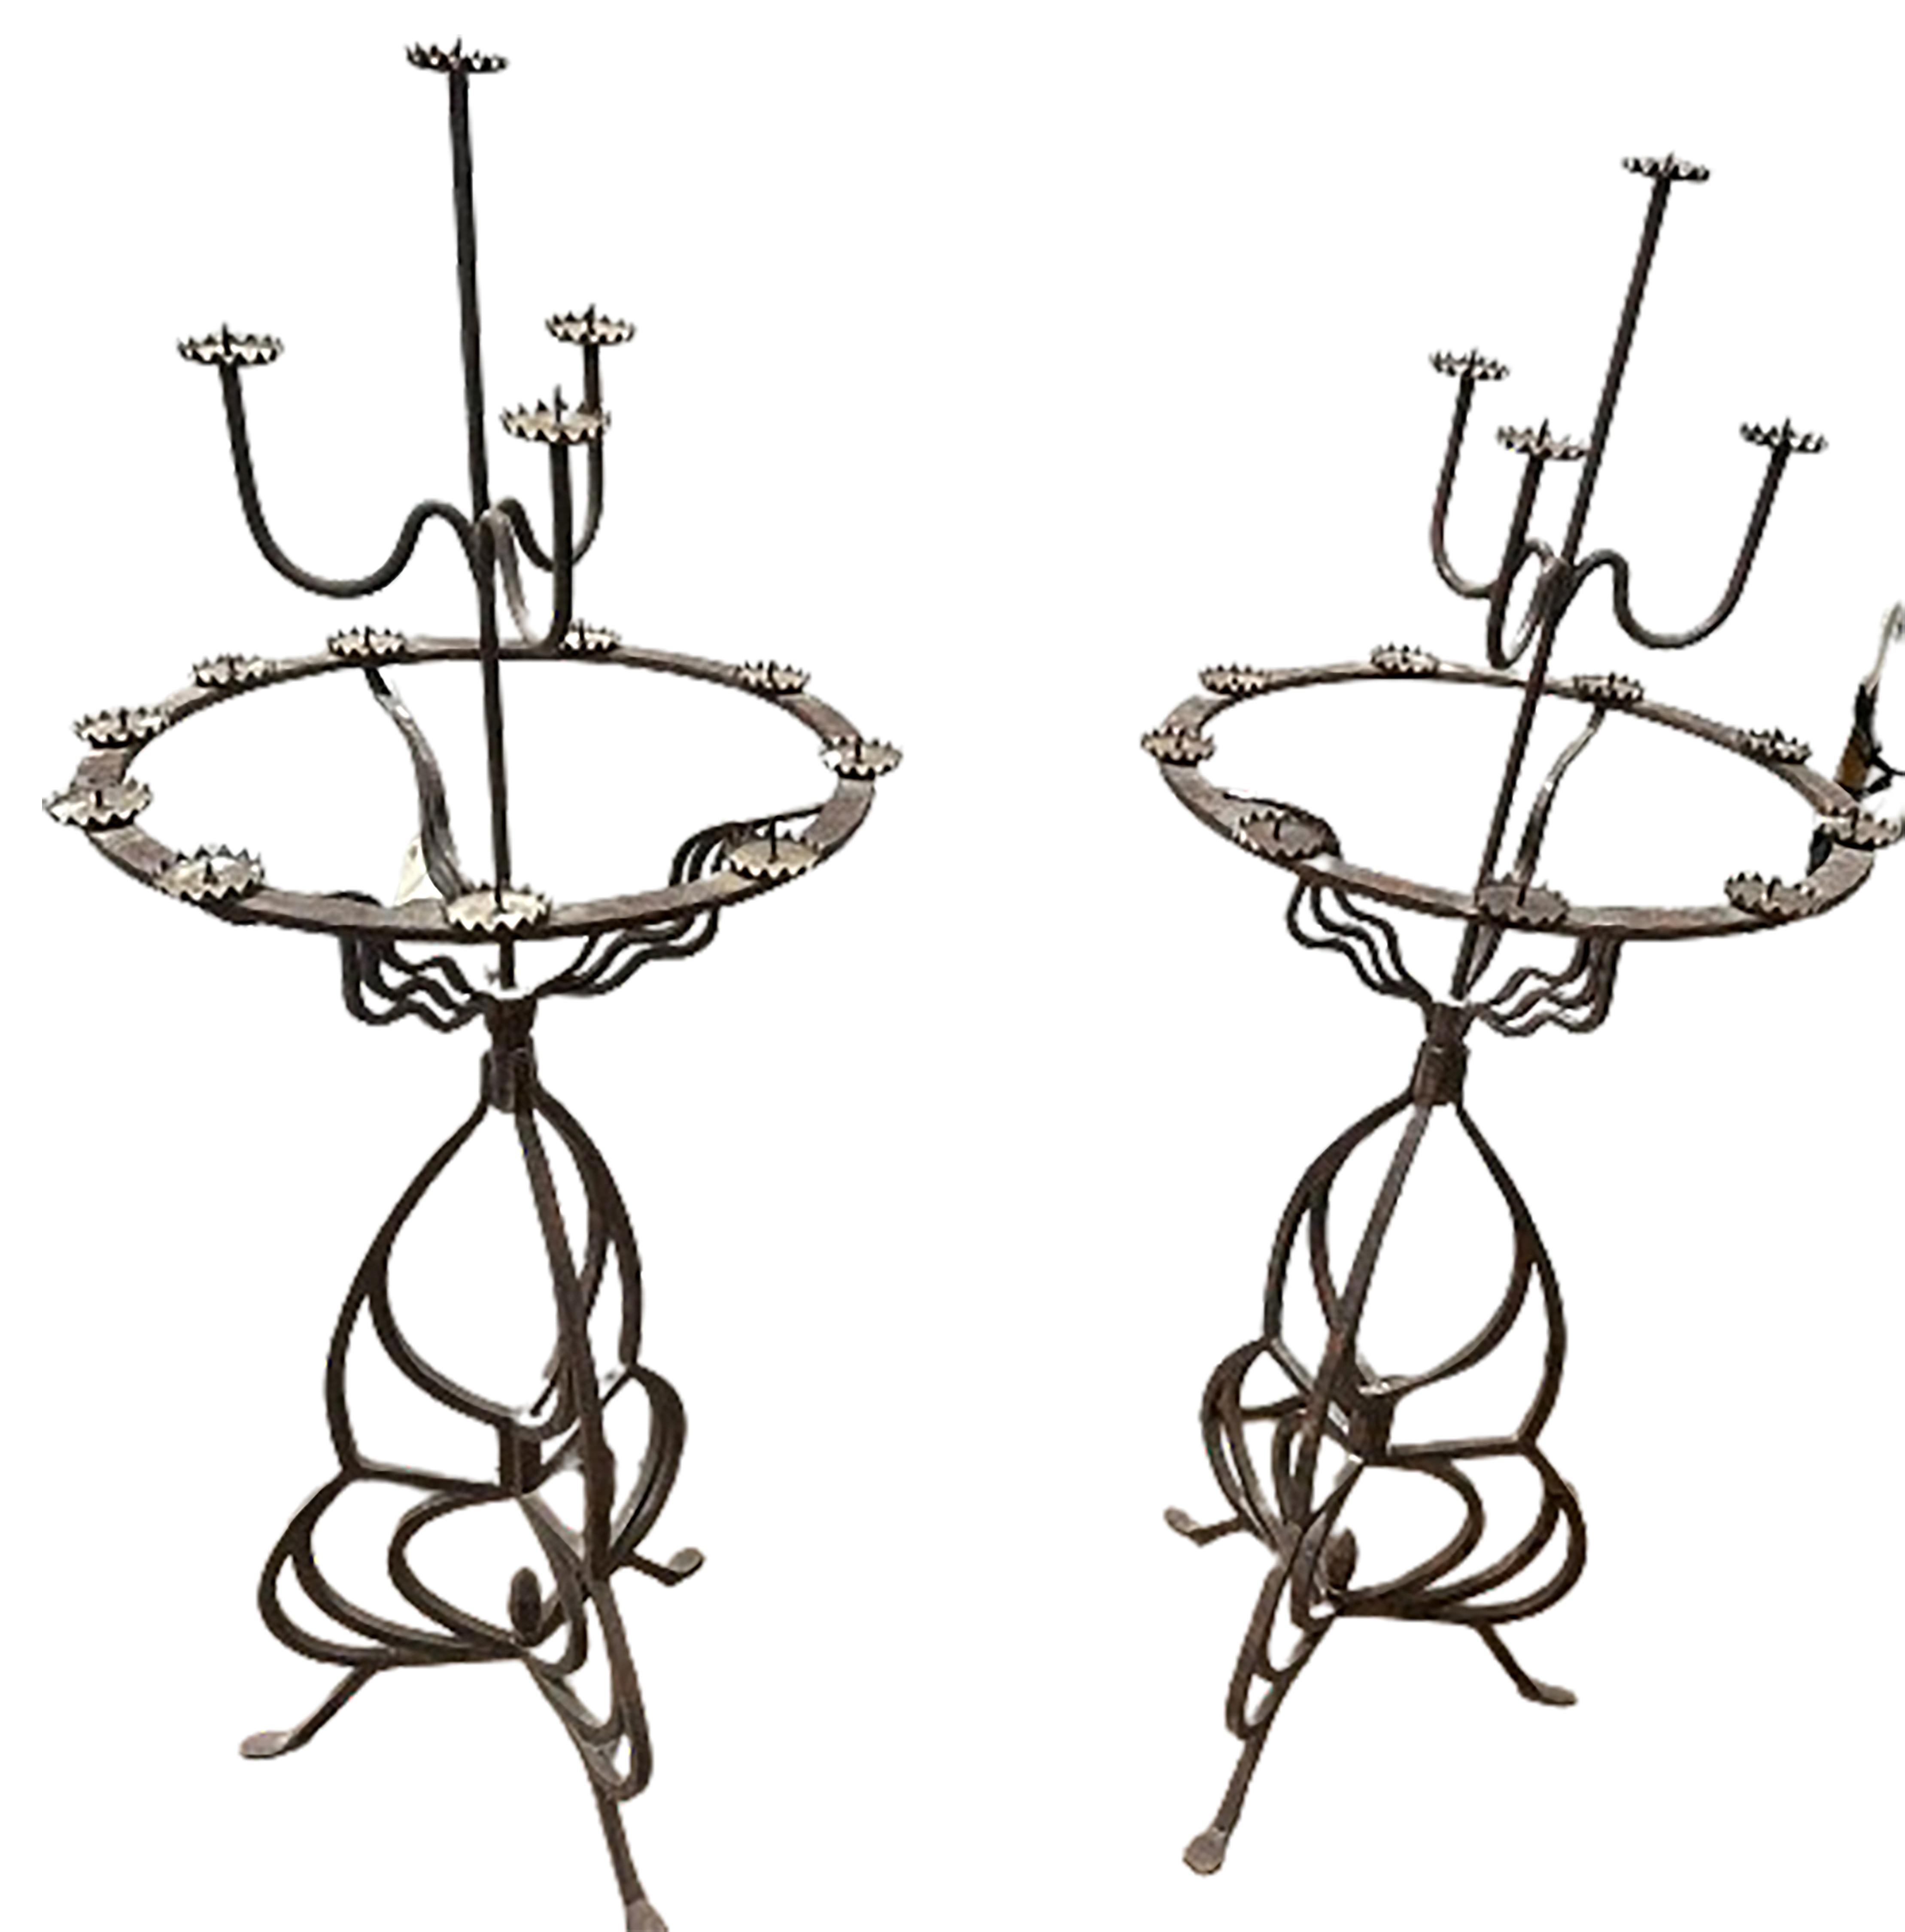 A handsome pair of antique gothic style pedestal candelabra torcheres. Made of wrought iron. Contains 13 candle holders at three different levels. The upper level is supported by wave pattern iron bars. The base is made up of intricate designs that